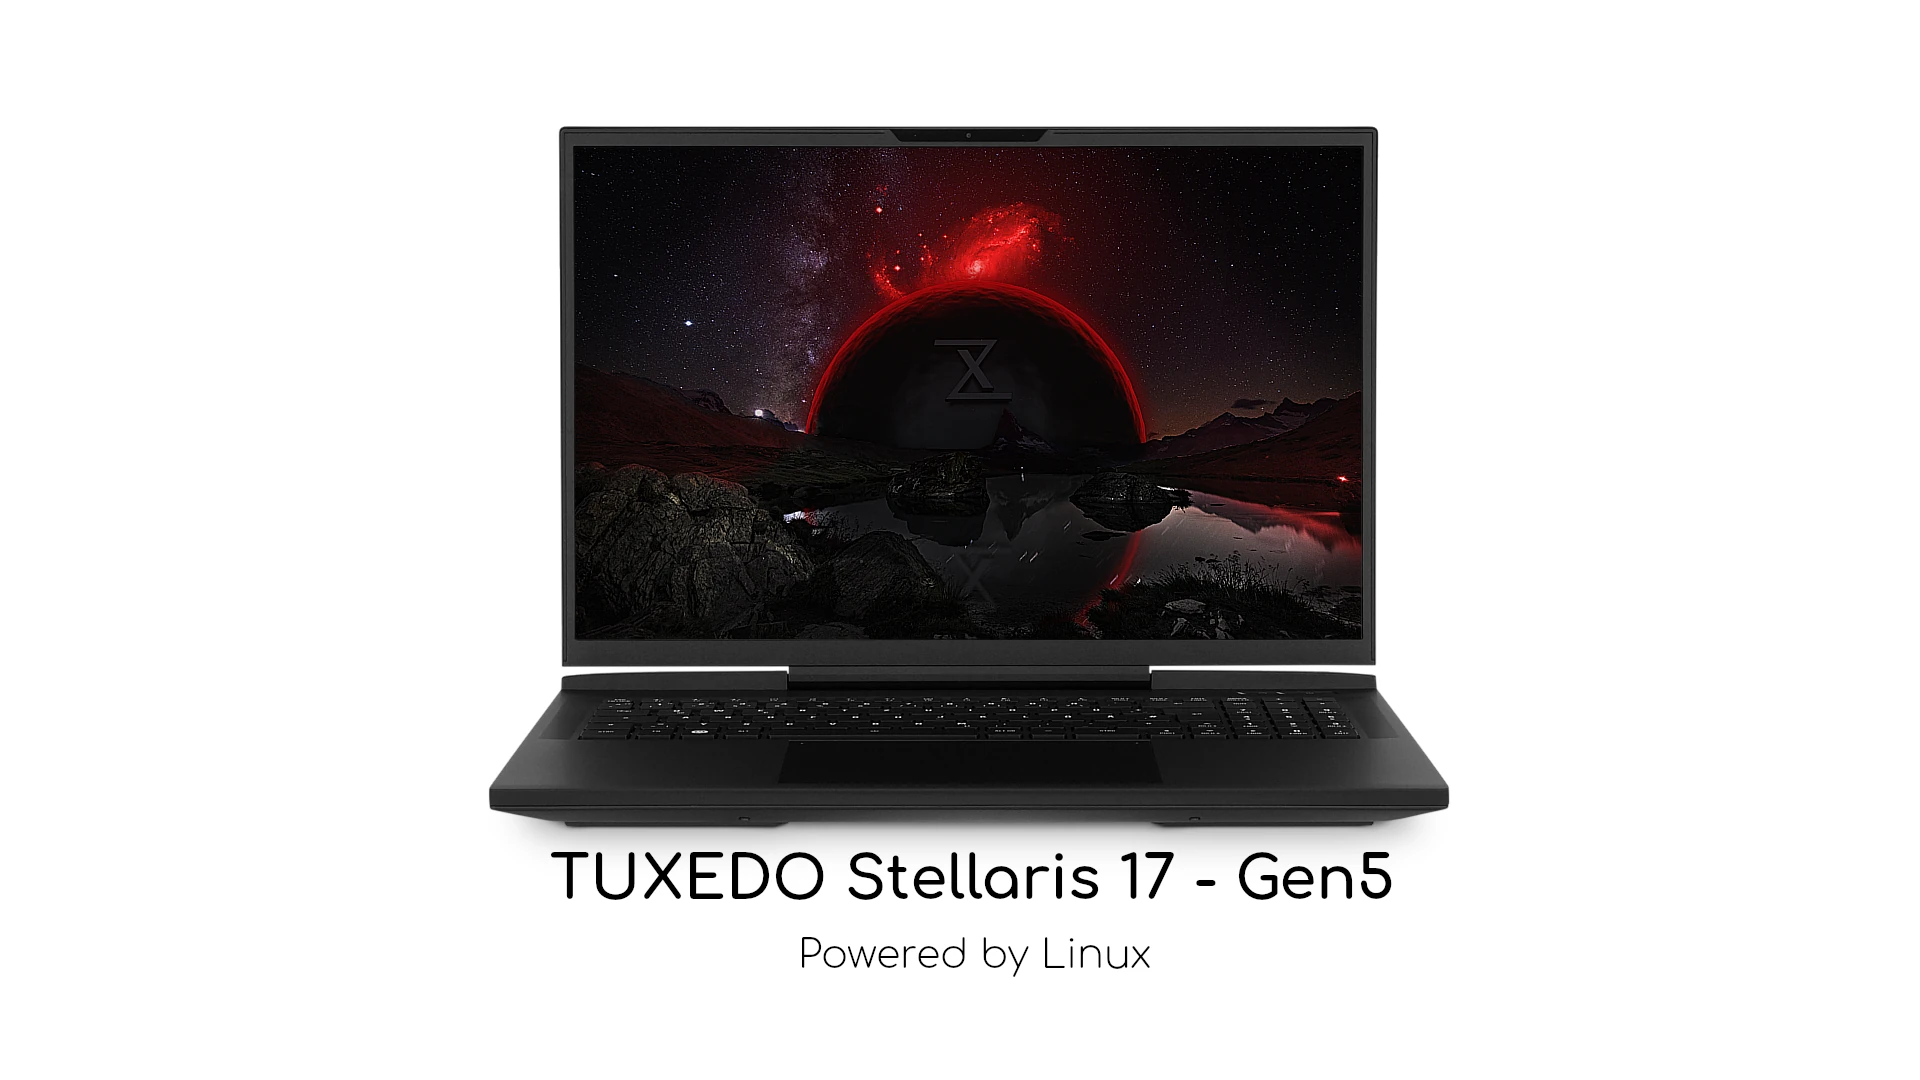 New TUXEDO Stellaris 17 Linux Laptop Promises the Fastest Notebook Hardware on the Planet